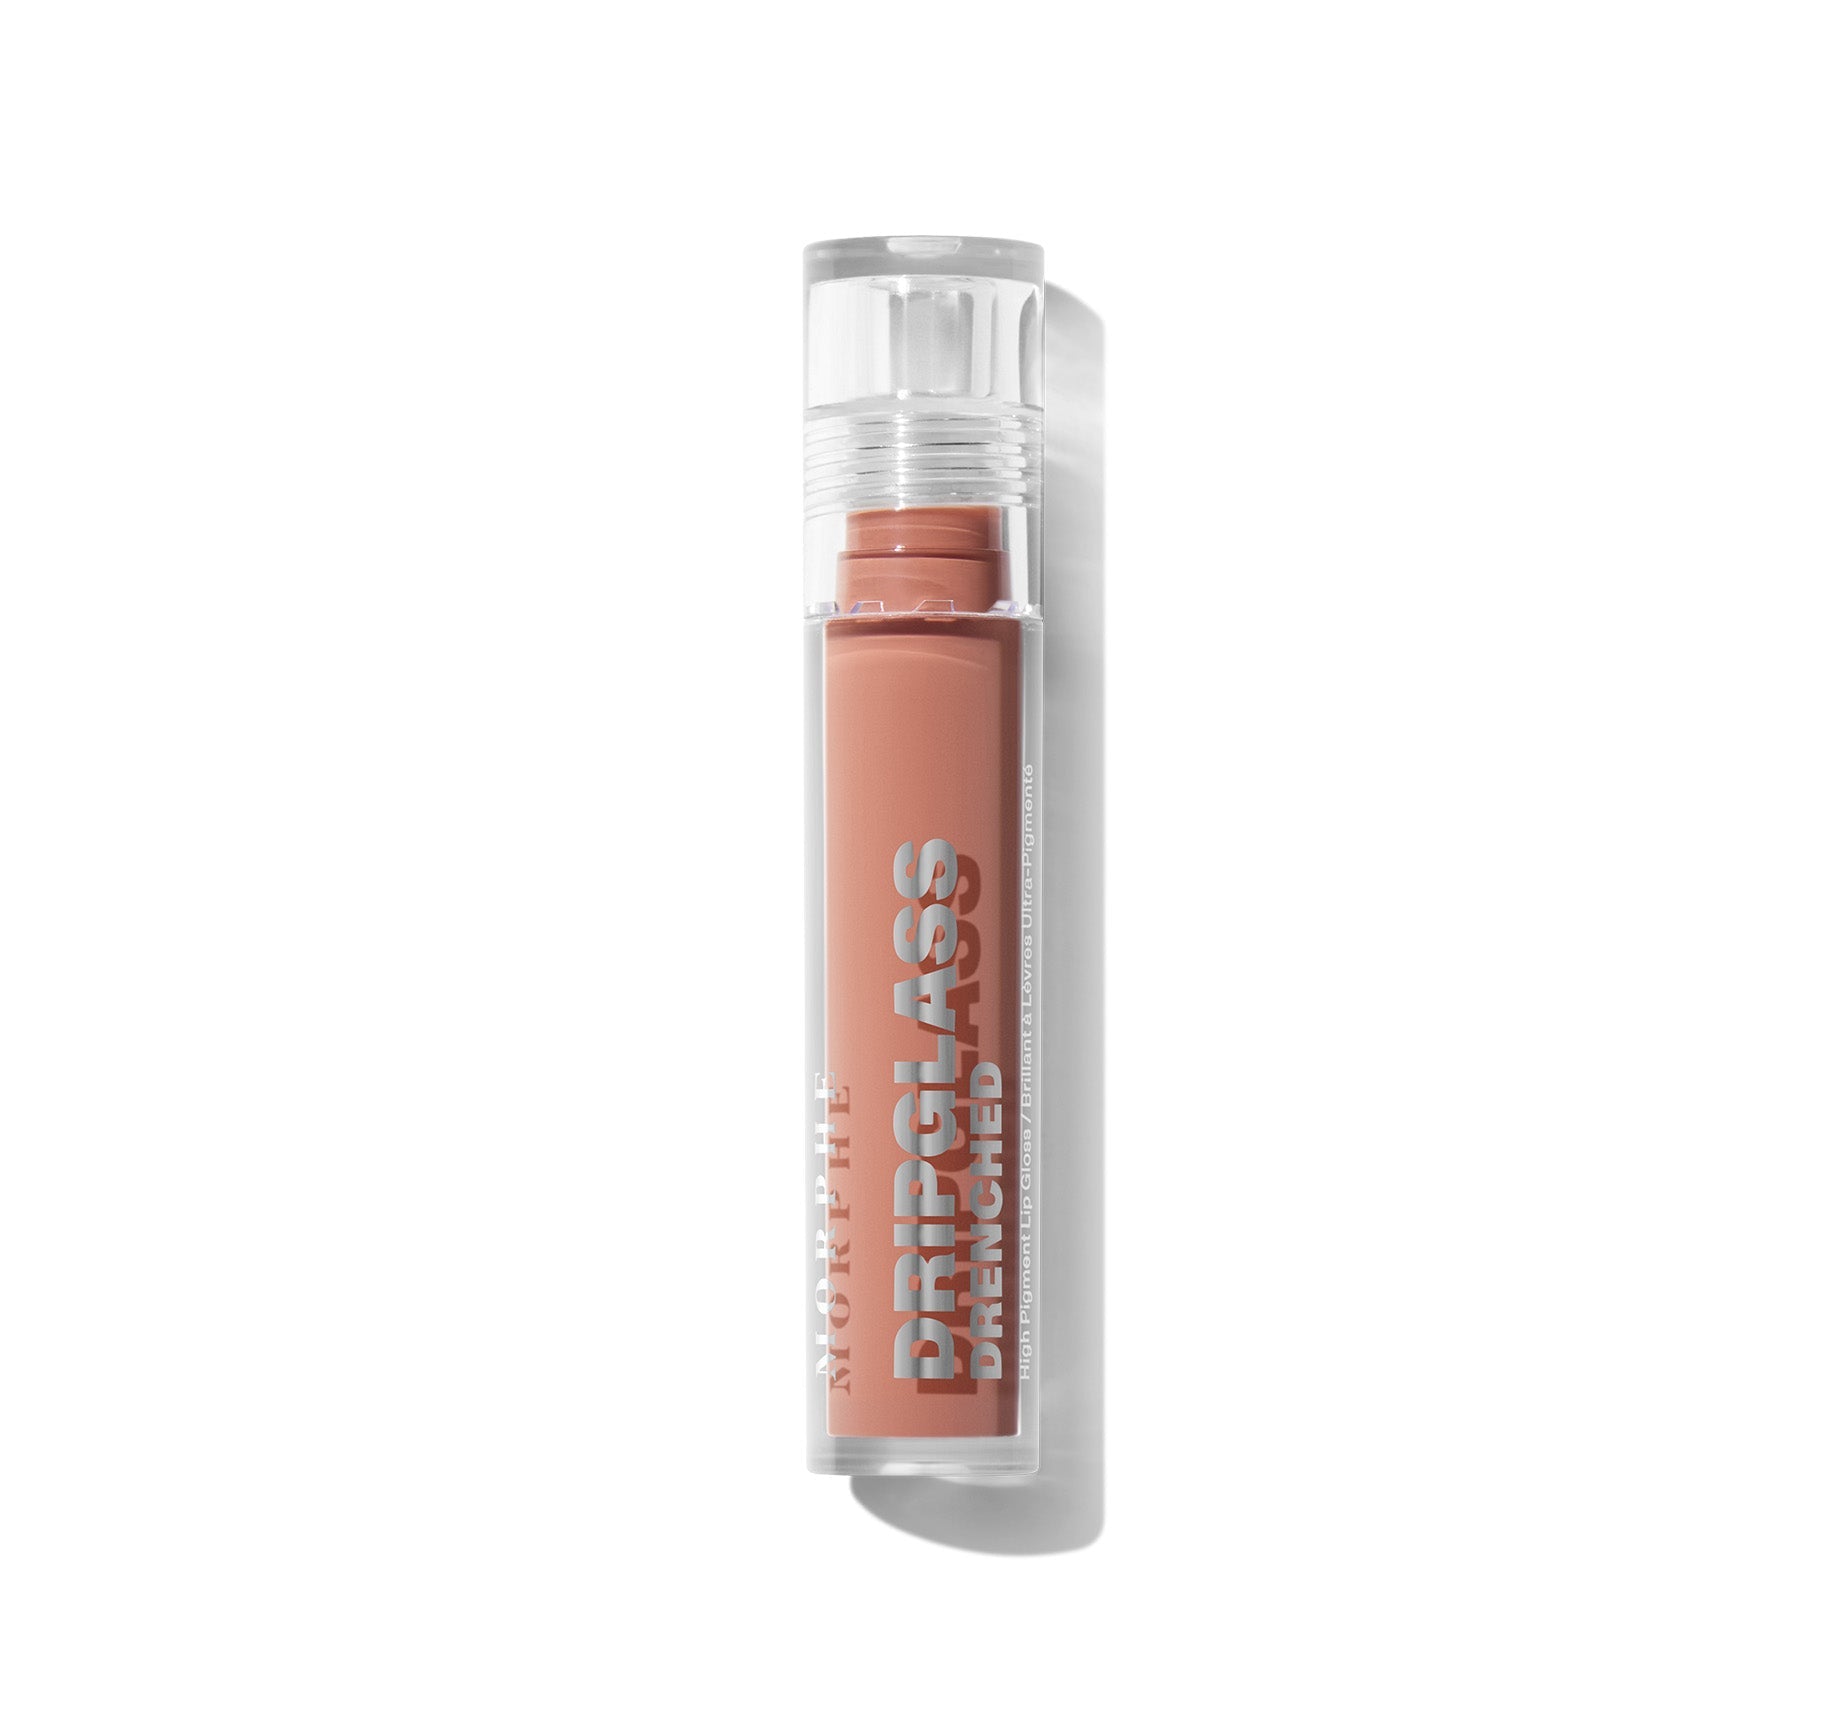 Dripglass Drenched High Pigment Lip Gloss - Naked Dip - Image 10